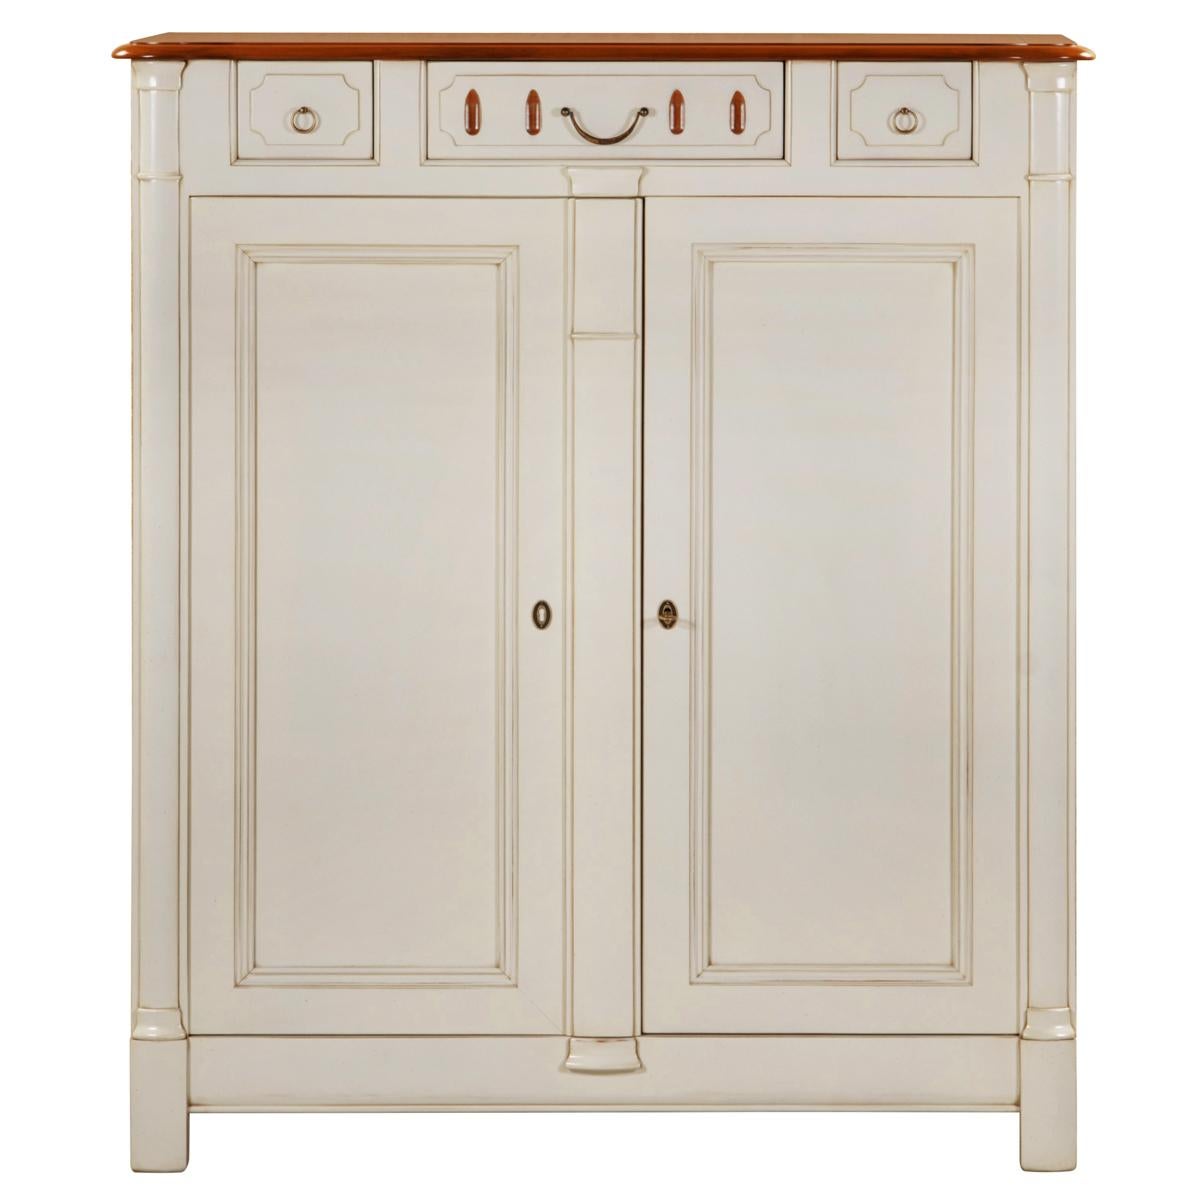 This tall and massive 2-door cabinet table is typical of French classical furniture pieces and belongs to our TRADITION collection which takes up the timeless classics of the charm of the French countryside.

The pilasters, the grooves and the